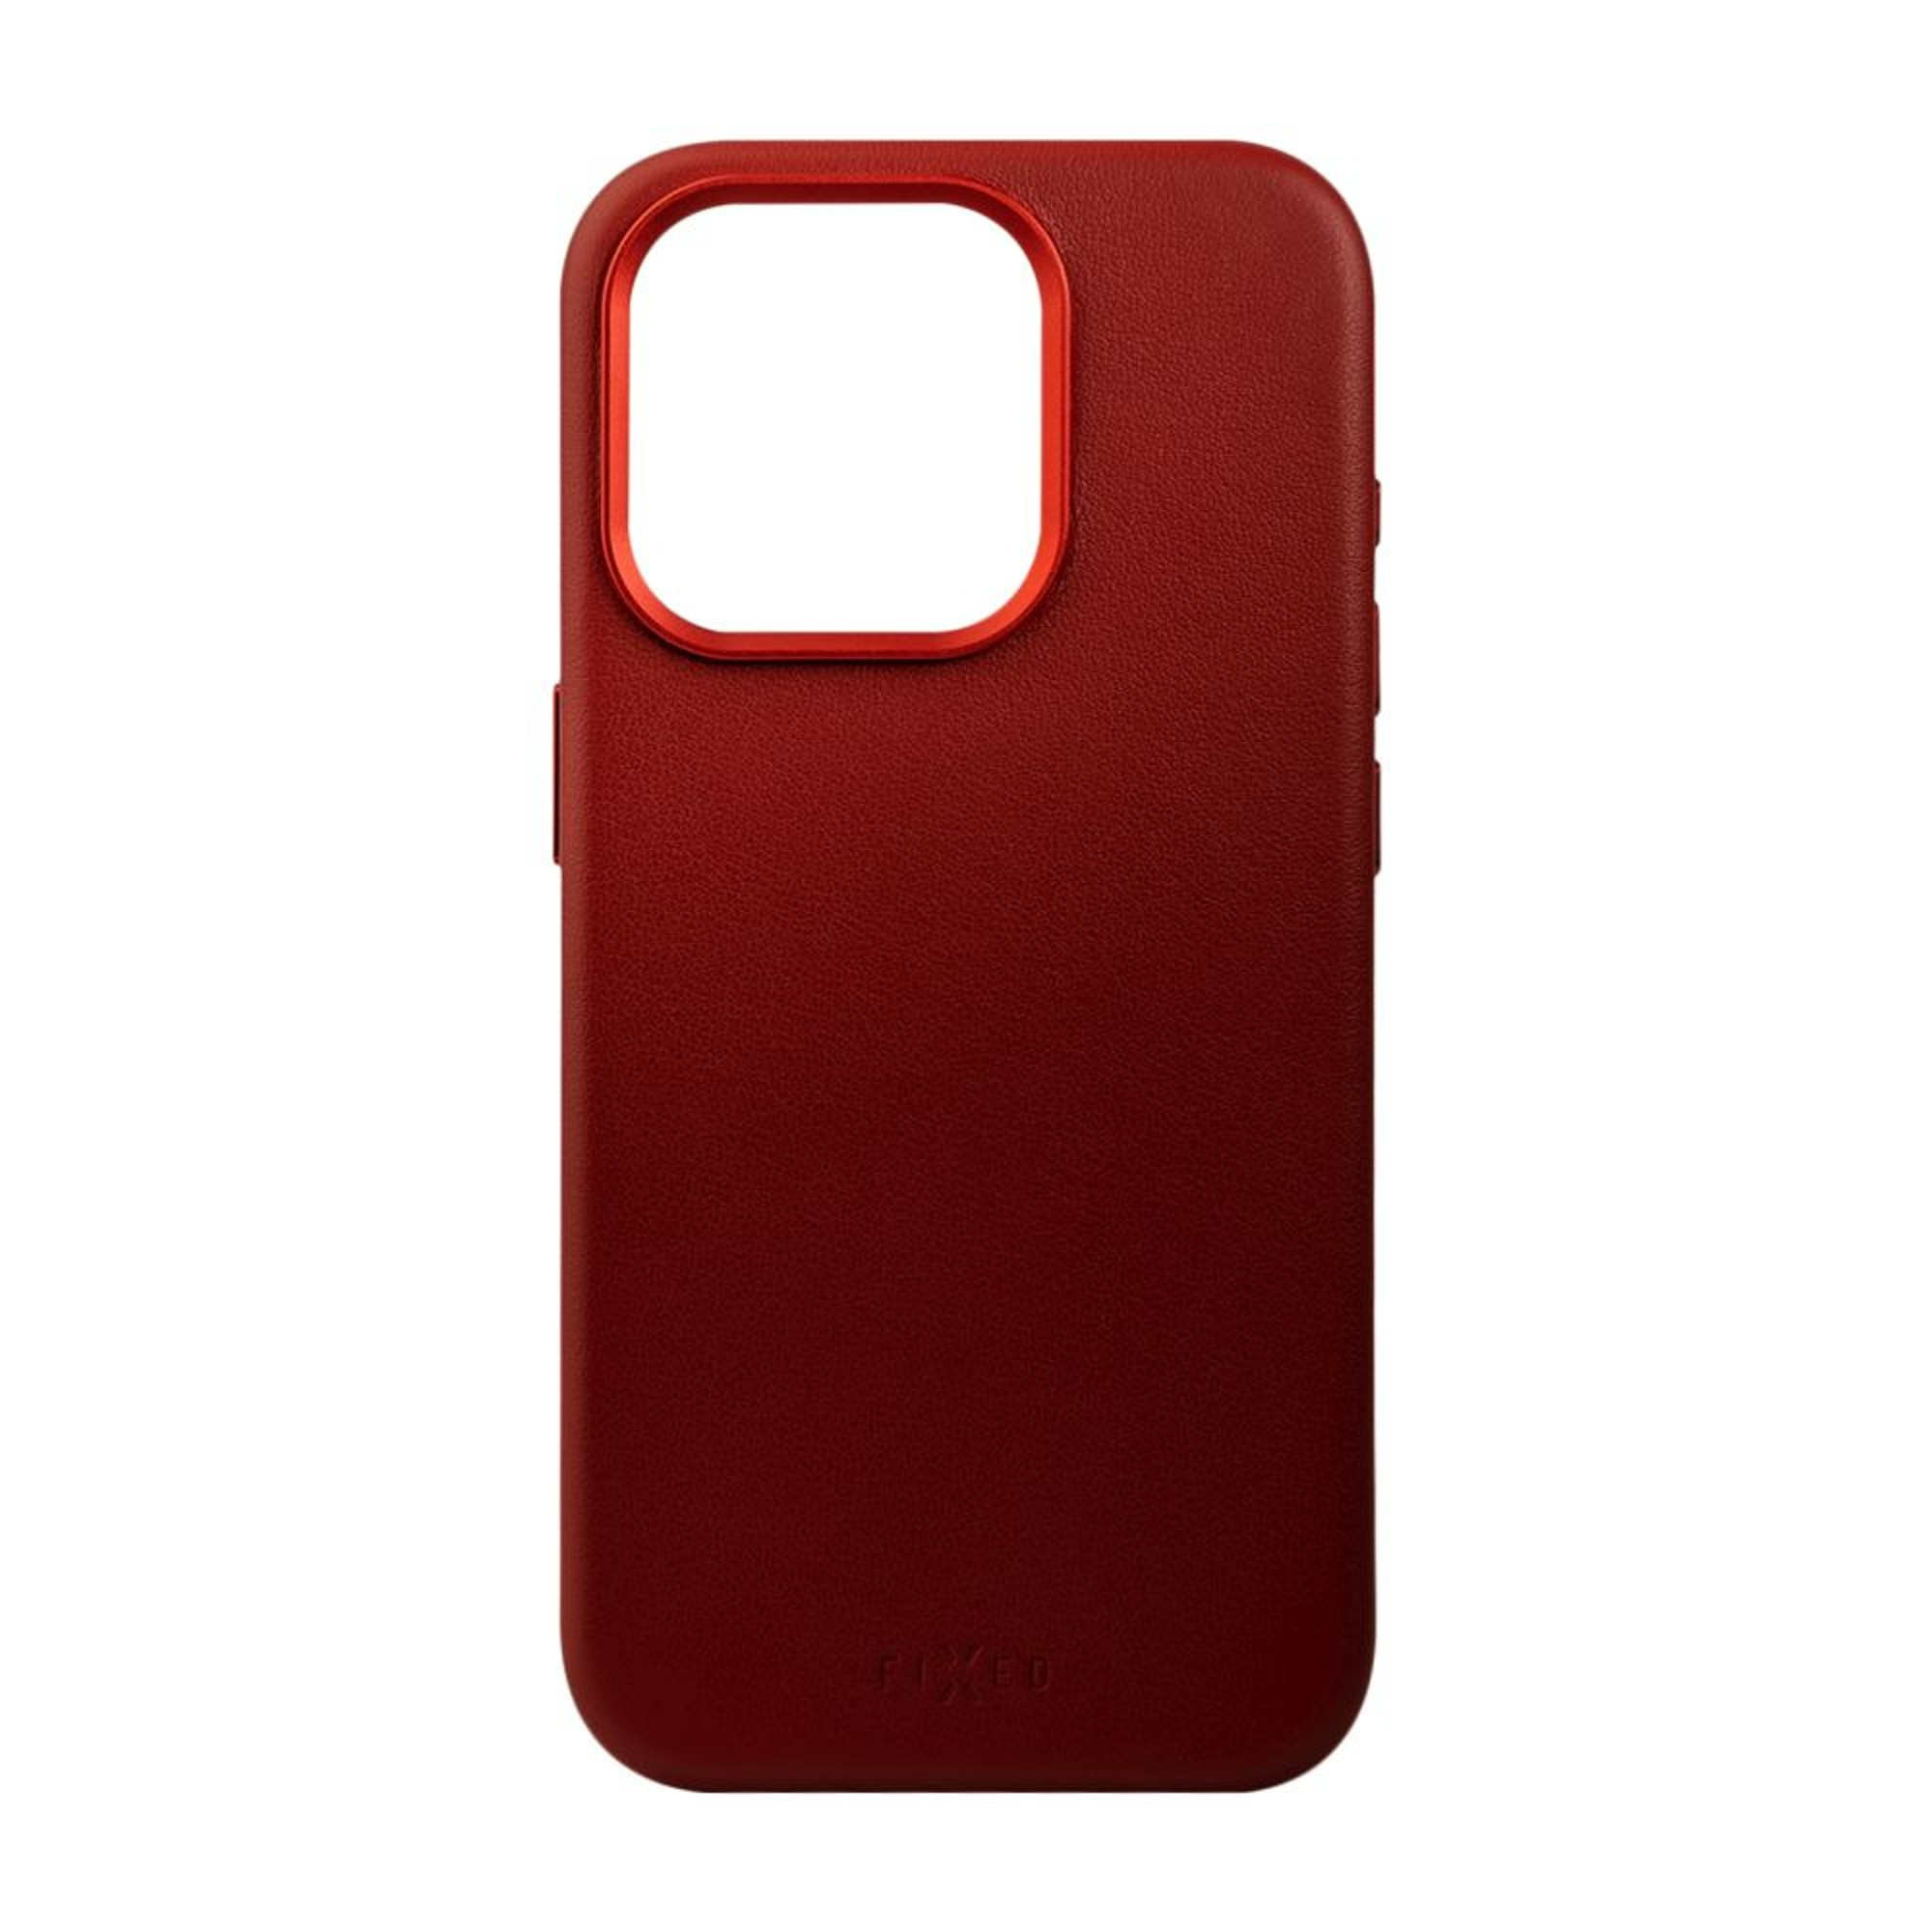 15, FIXED FIXLM-1200-RD, Rot Apple, iPhone MagLeather Backcover,